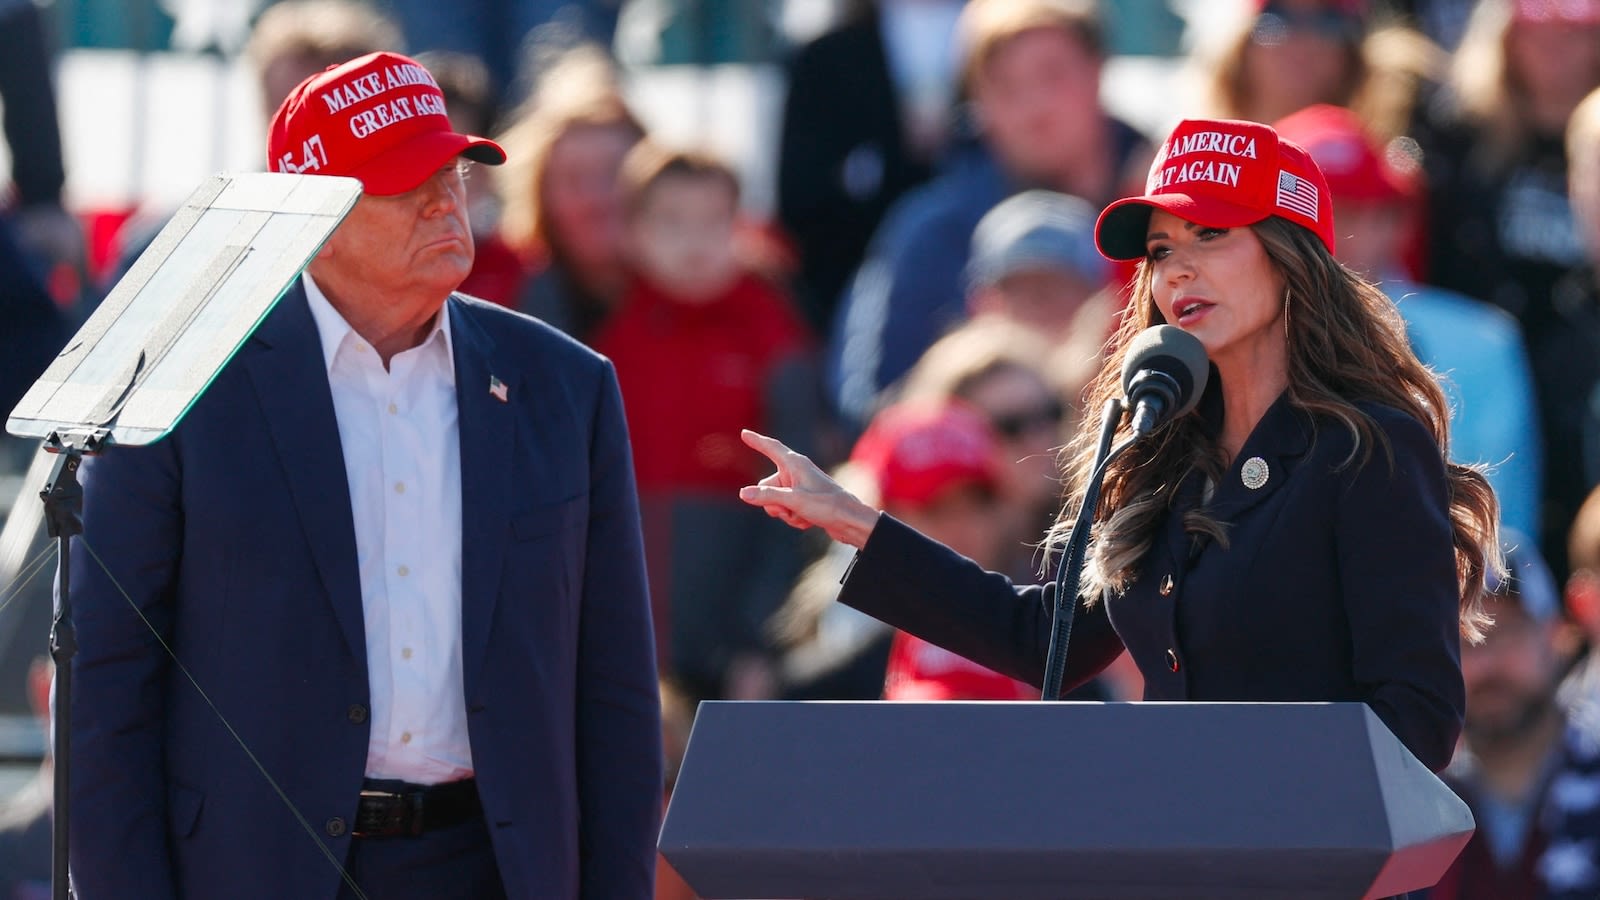 'She killed her chances': Kristi Noem's odds dim of being Trump's VP pick, sources say